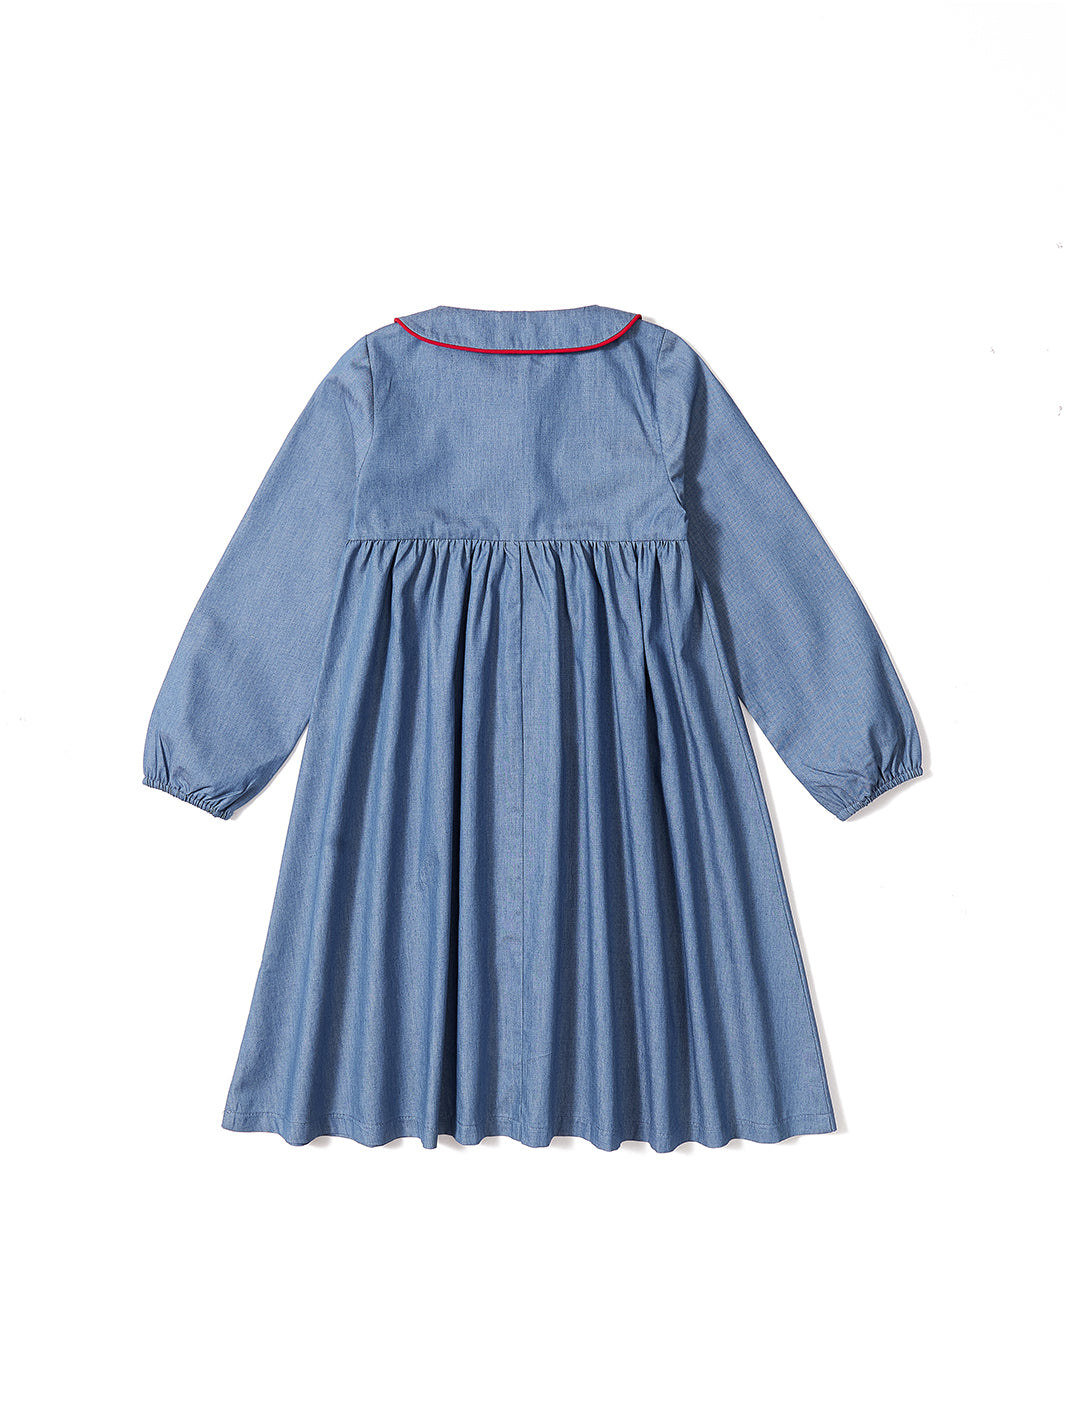 Contrast Color Piping Denim Dress